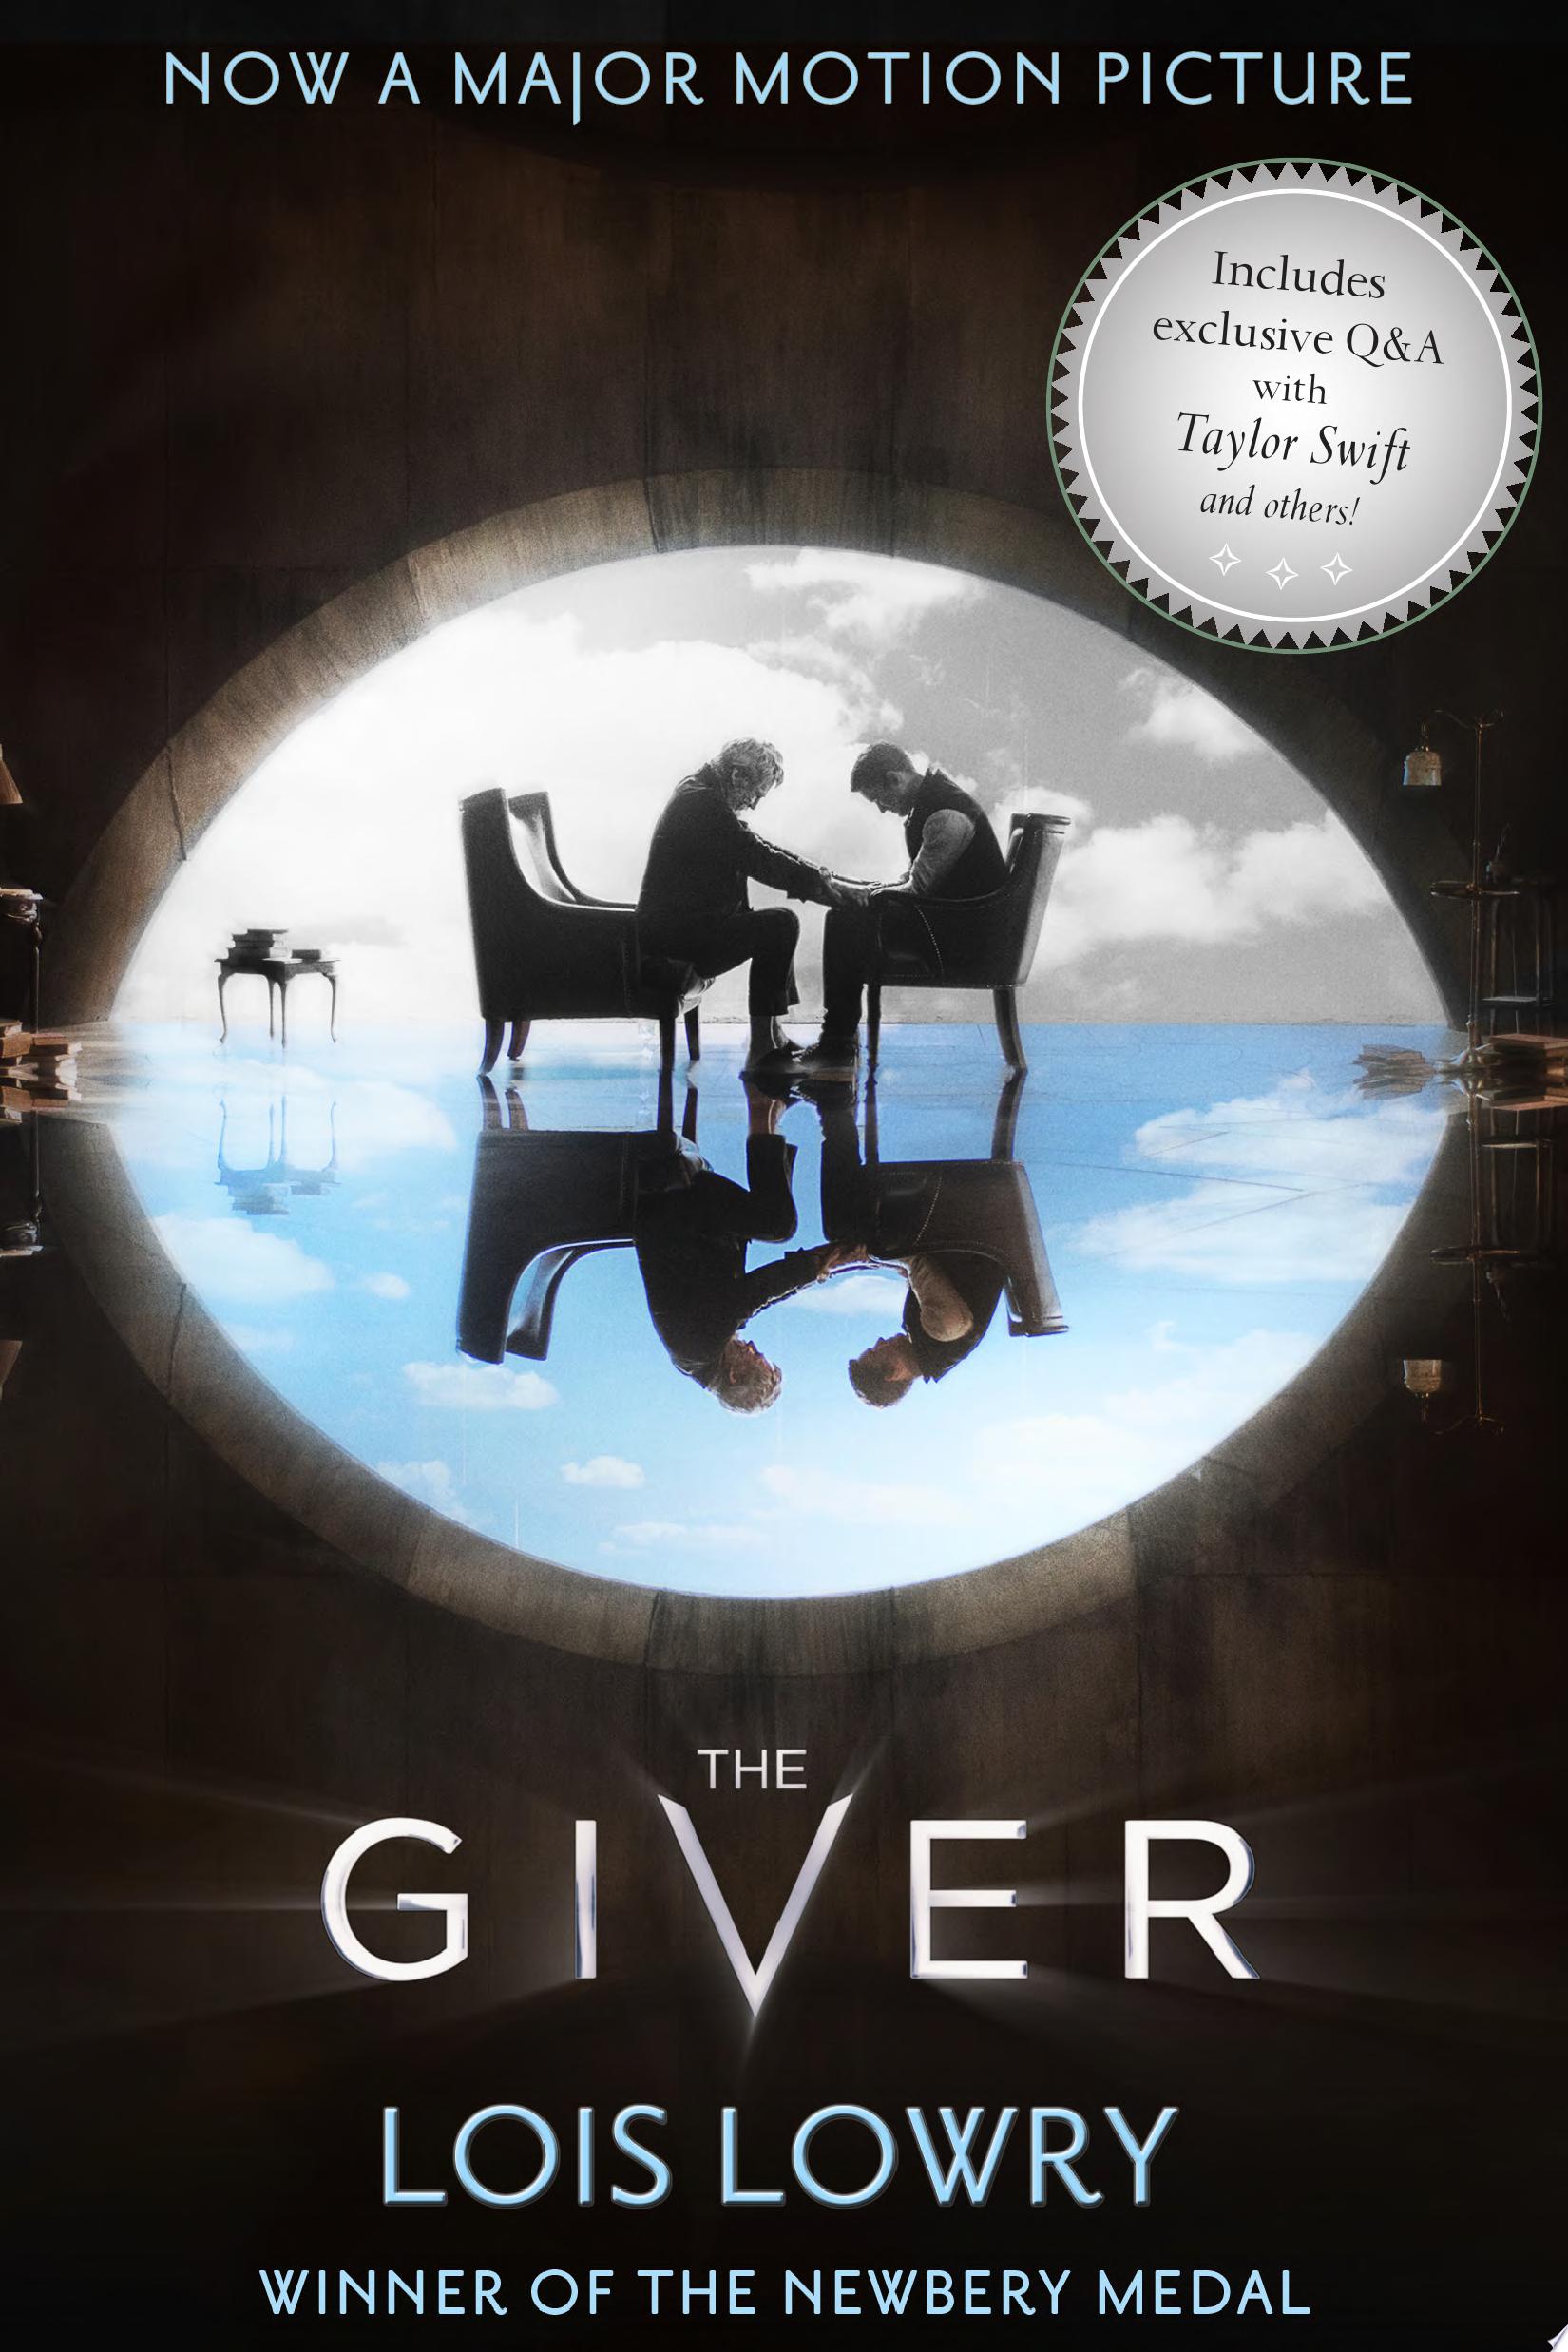 Image for "The Giver"